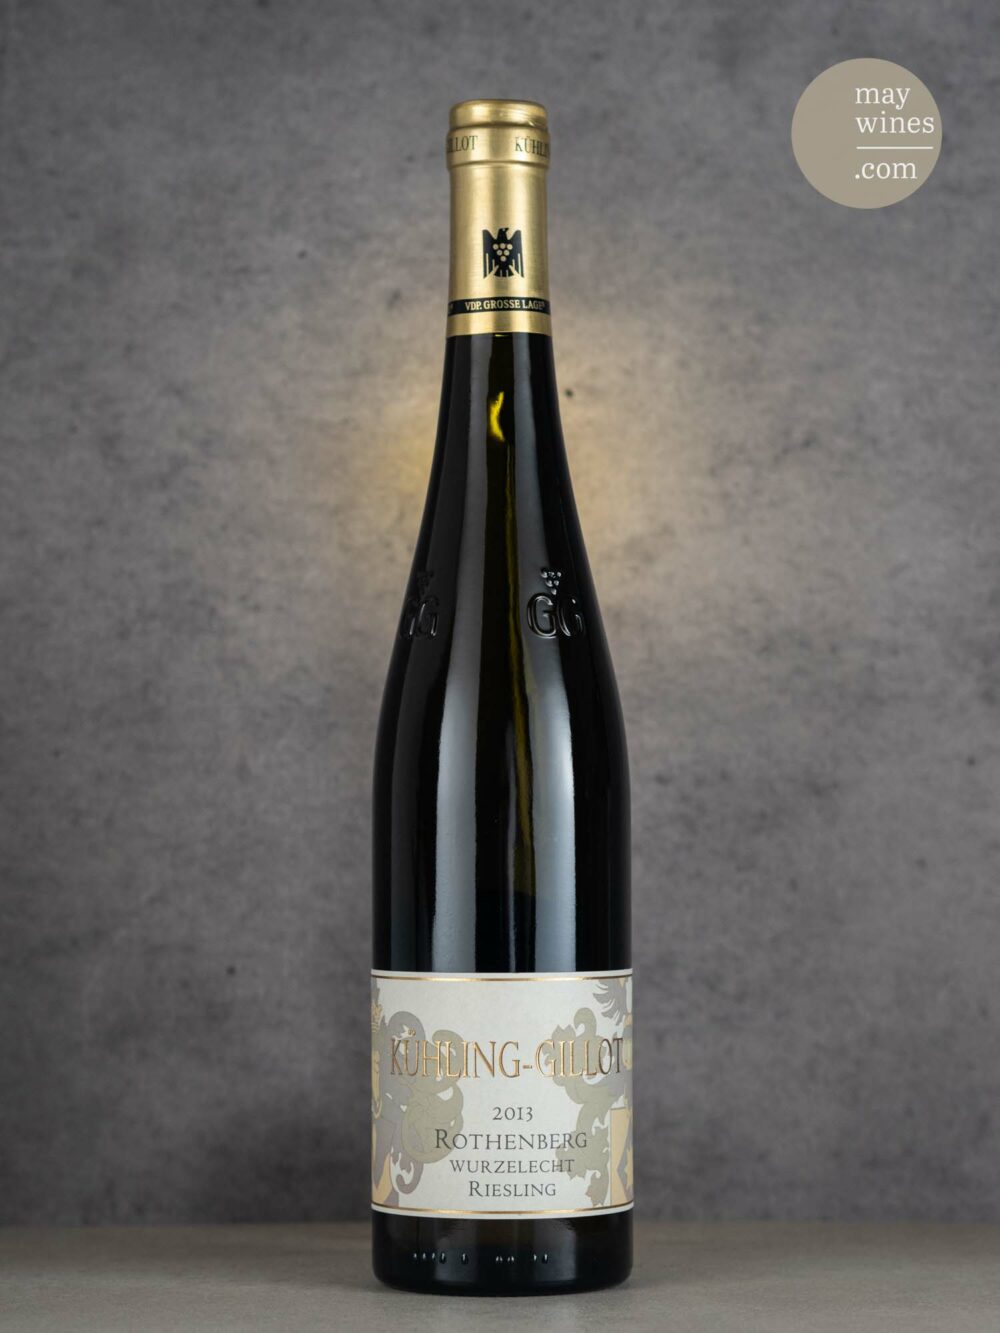 May Wines – Weißwein – 2013 Rothenberg Riesling GG - Kühling-Gillot